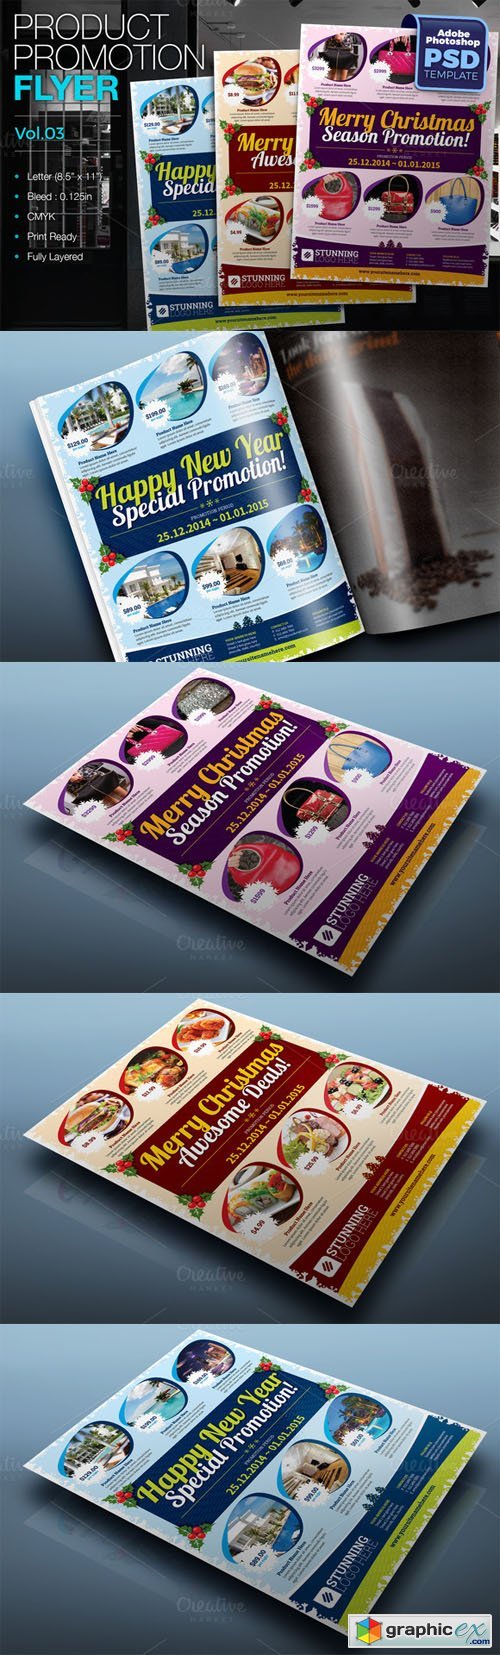 Multipurpose Product Promotion Flyer 125920